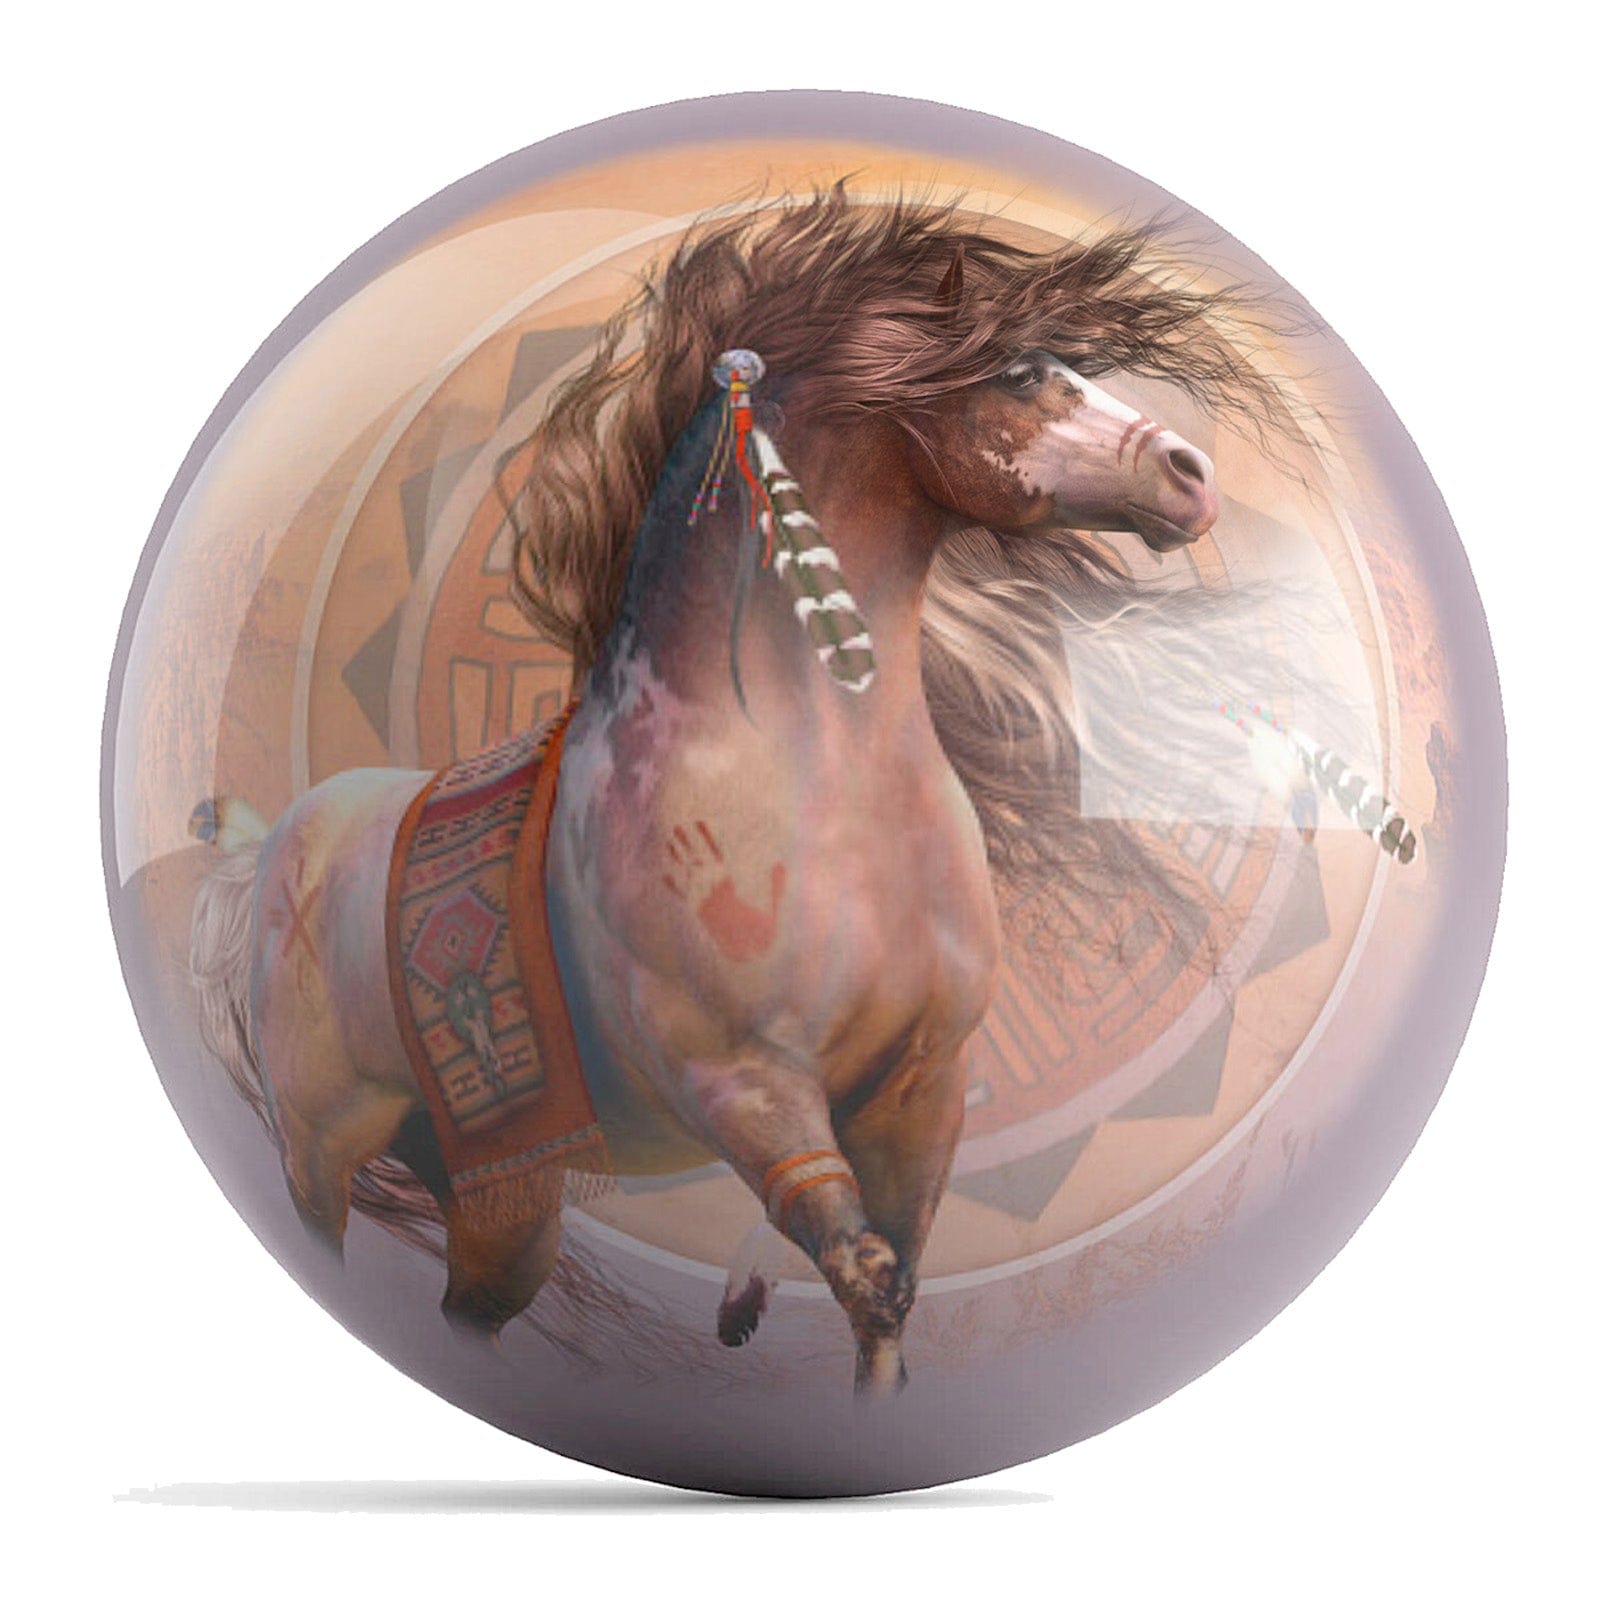 OnTheBallBowling Spirit Warrior Ball Bowling Ball by Laurie Prindle